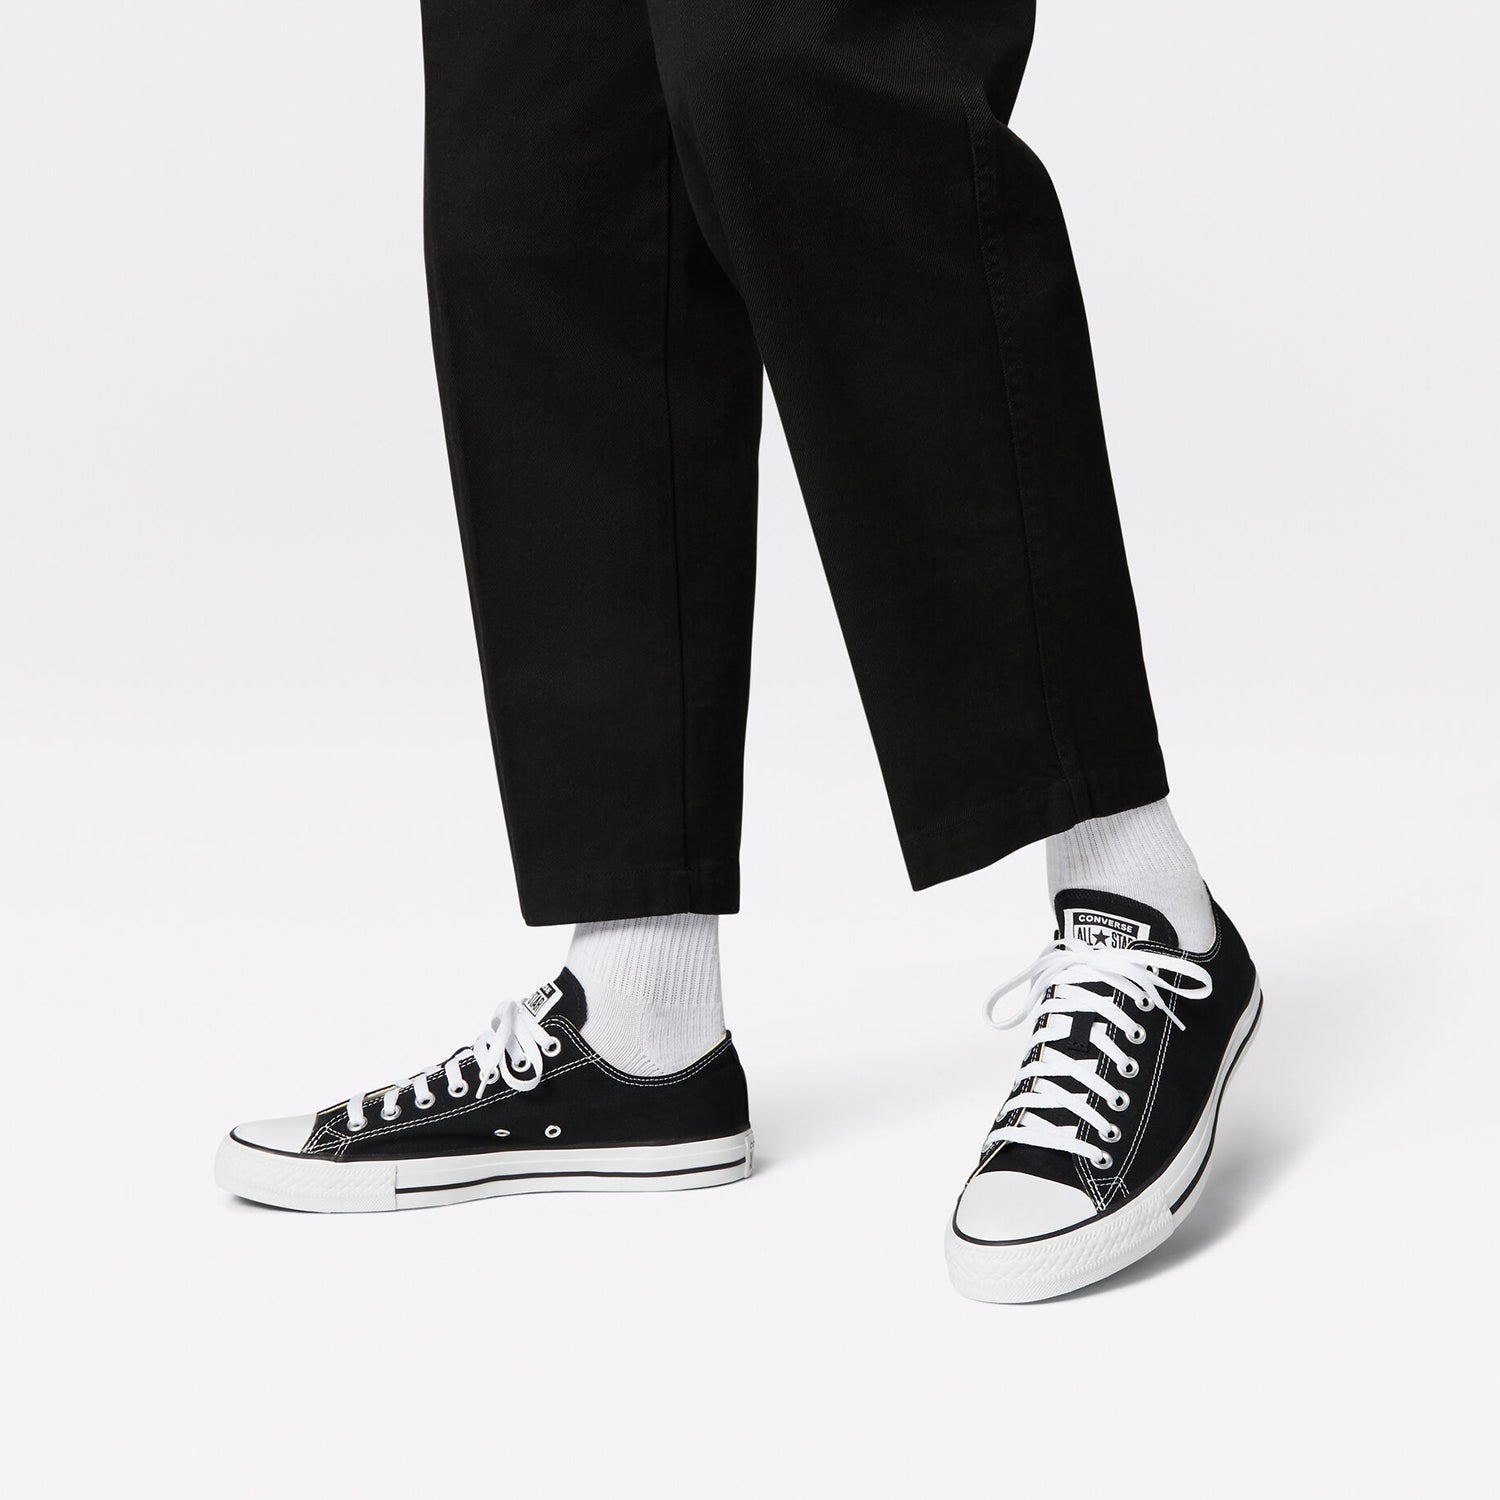 Converse Men's Chuck Taylor All Star Ox Core Sneakers